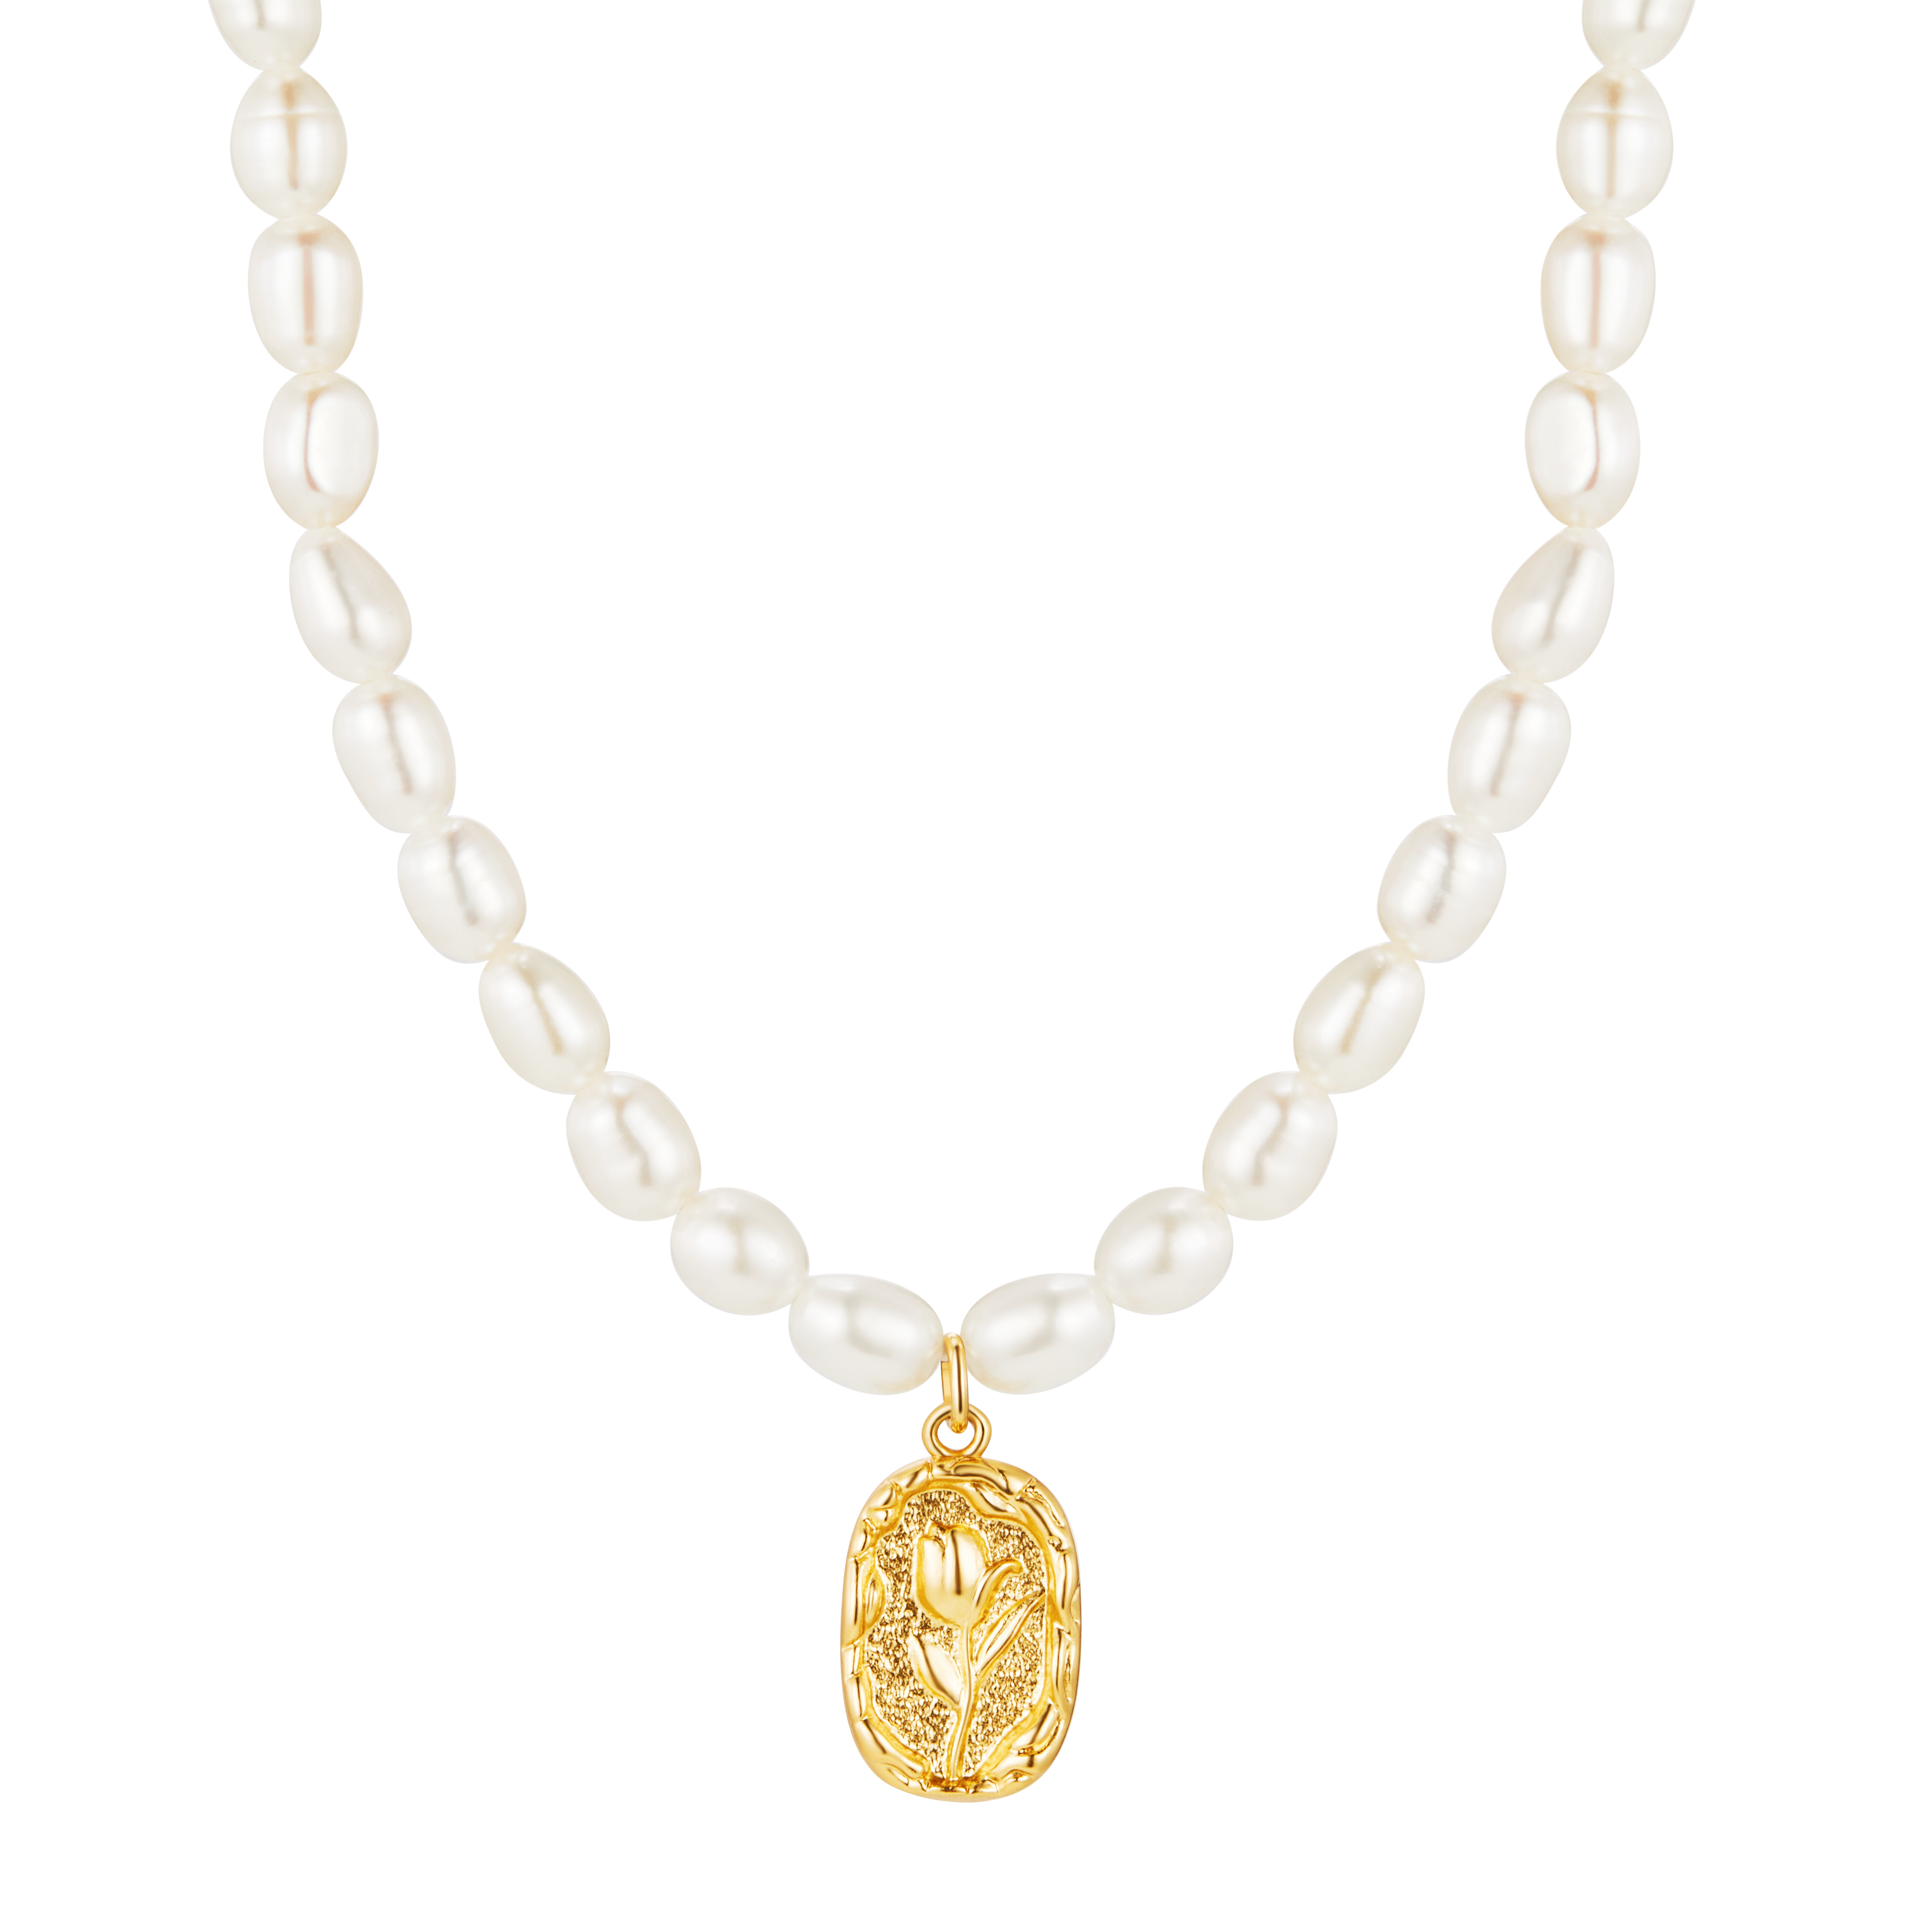 Delicate Freshwater Pearl Necklace with Coin Pendant